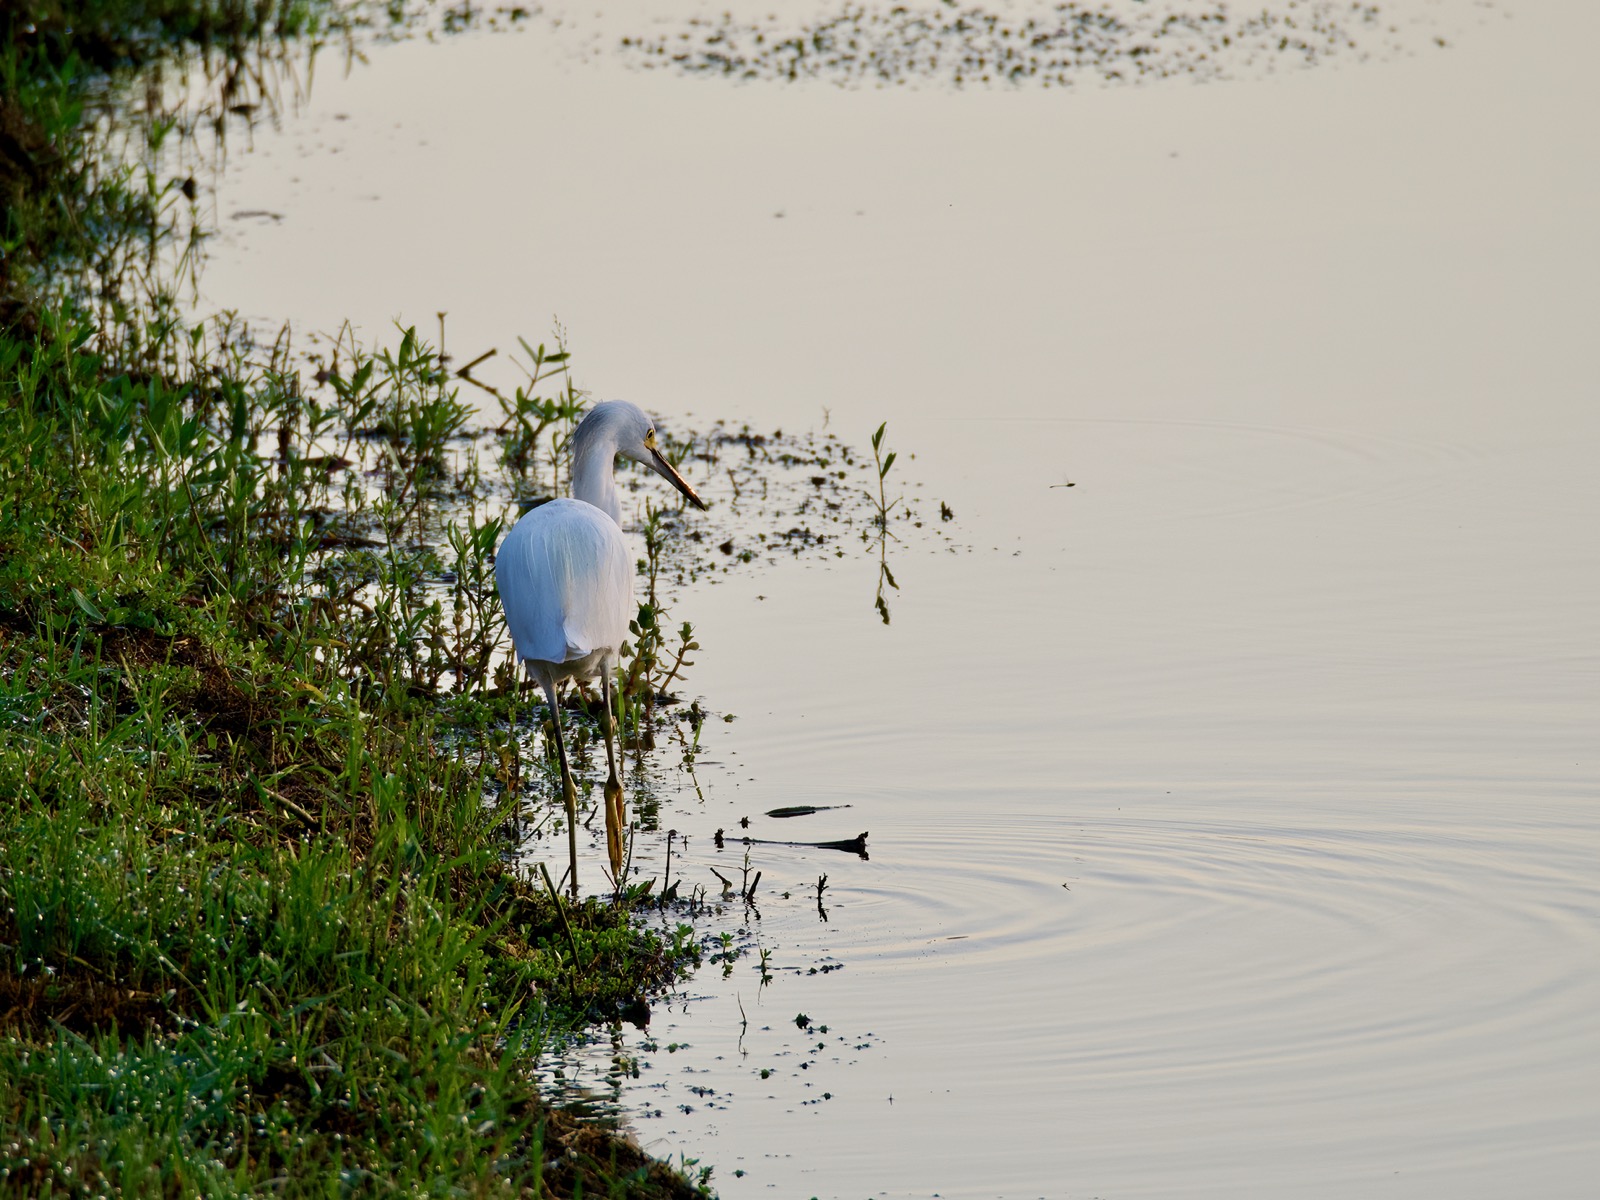 Snowy egret wading at the edge of a pond in dim early morning light.